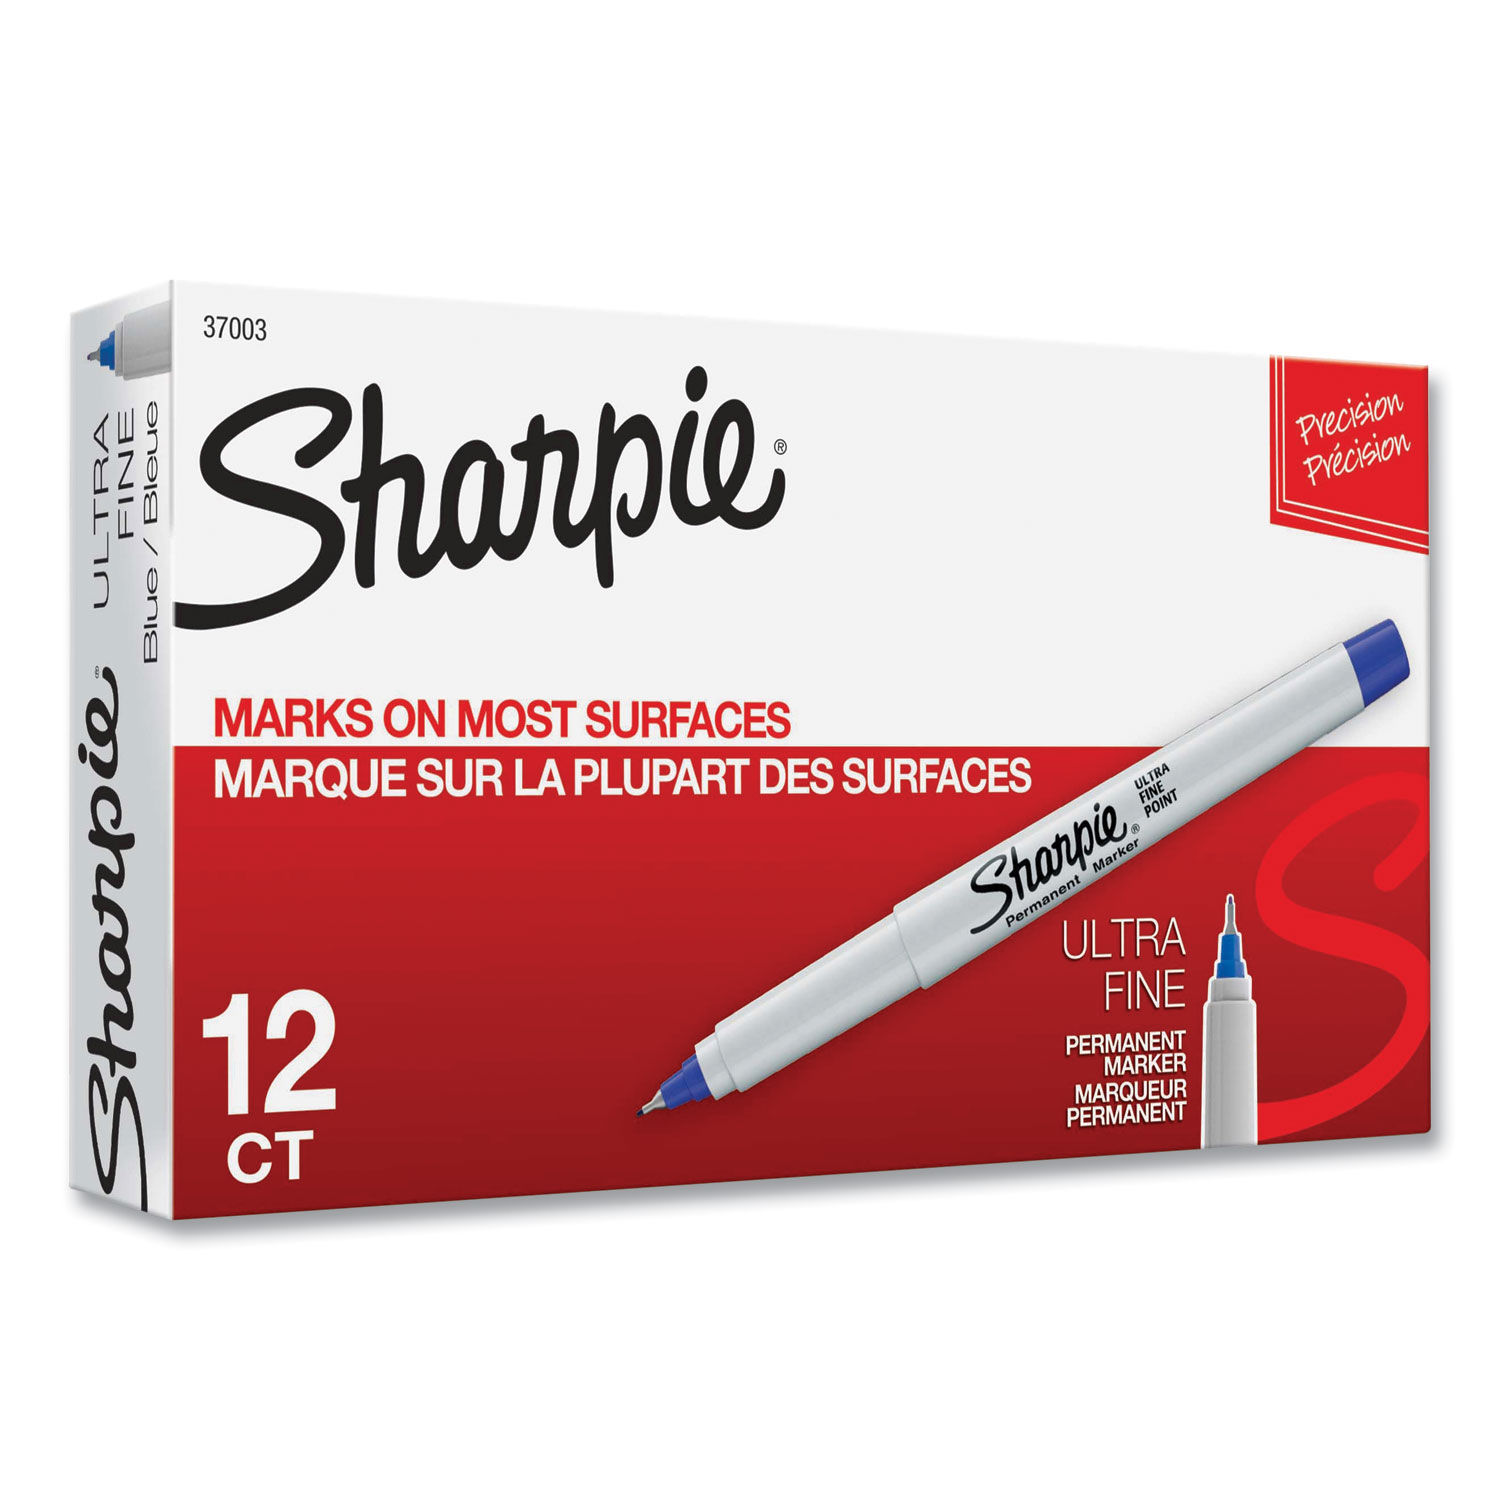 Sharpie Special Collectors Edition Permanent Markers and Dragon